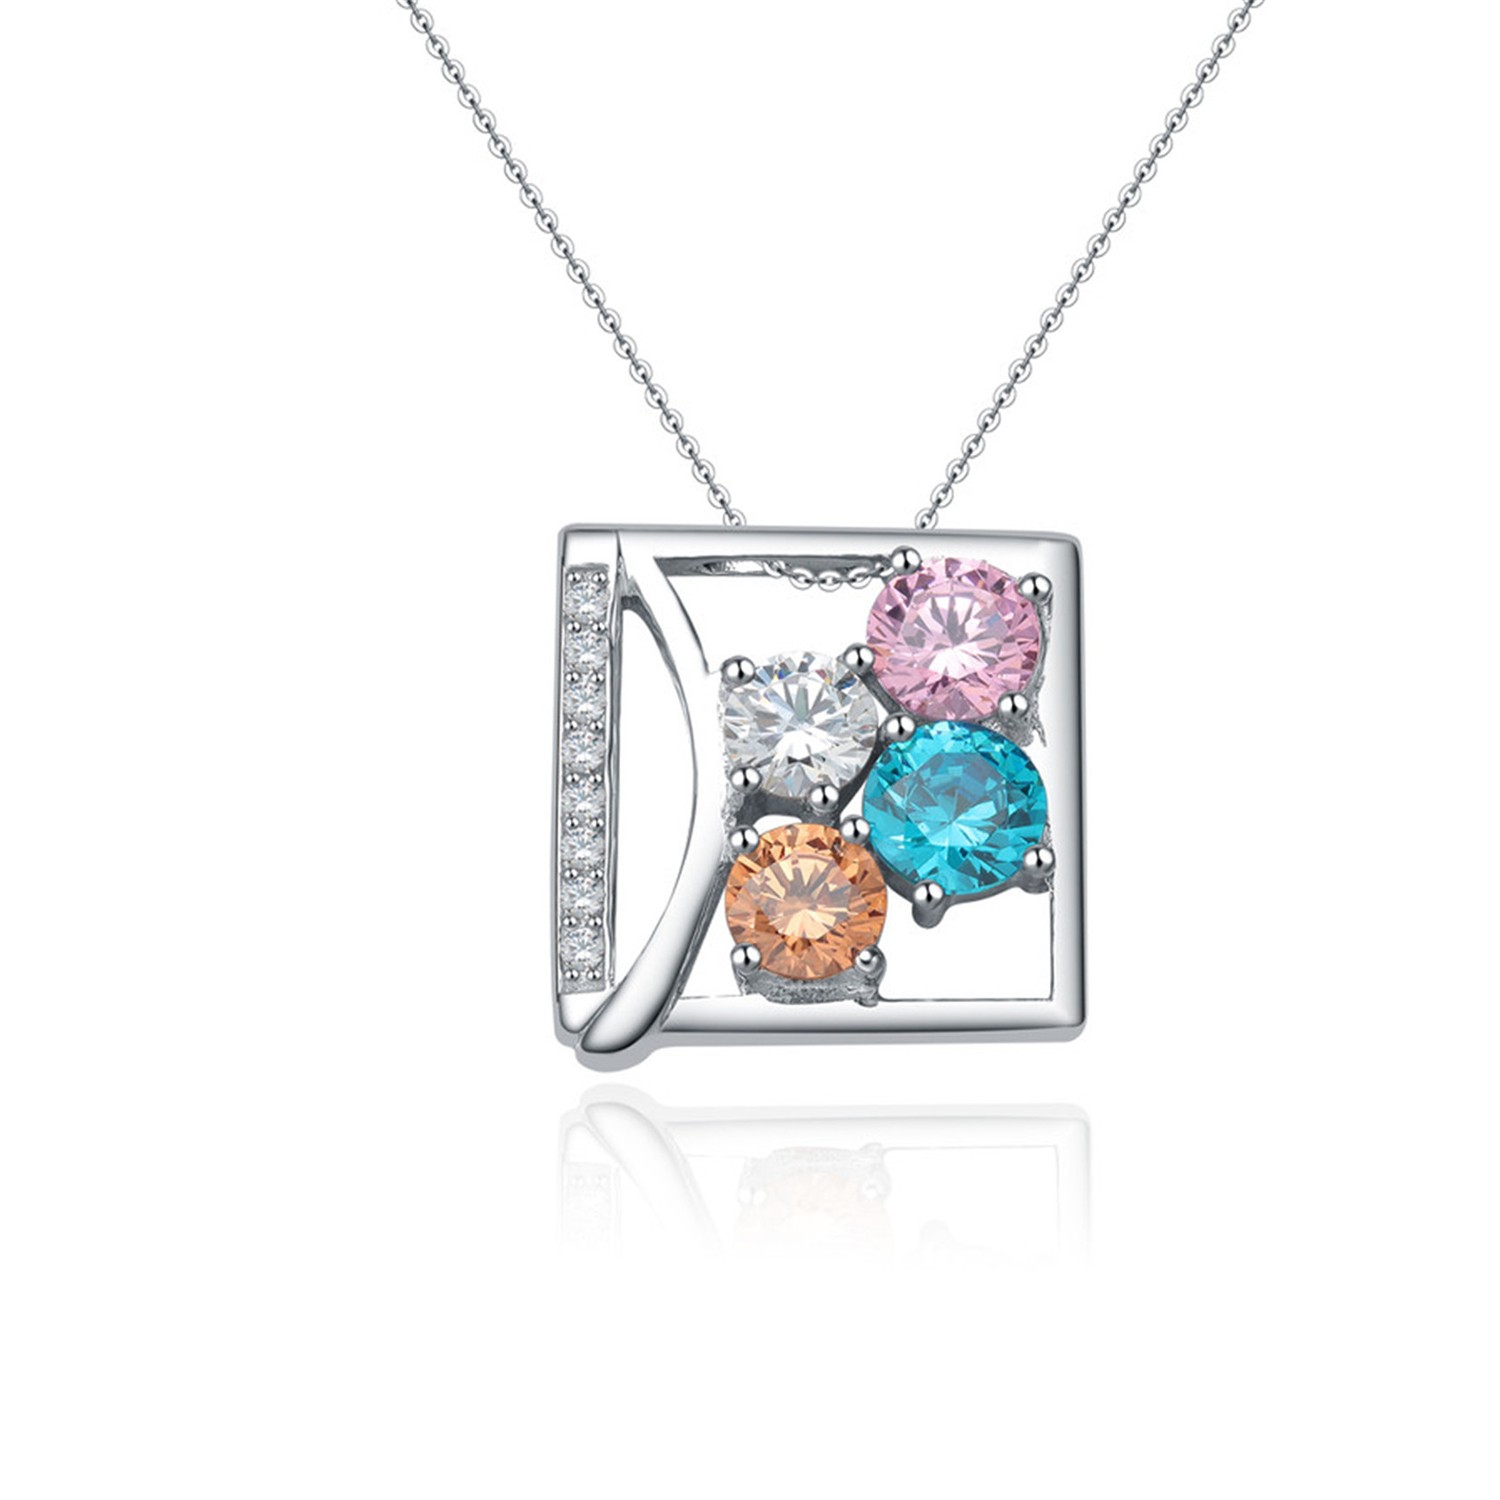 Square Colorful Cubic Zirconia Pendant Necklace 925 Sterling Silver Charming silver Necklace Jewelry